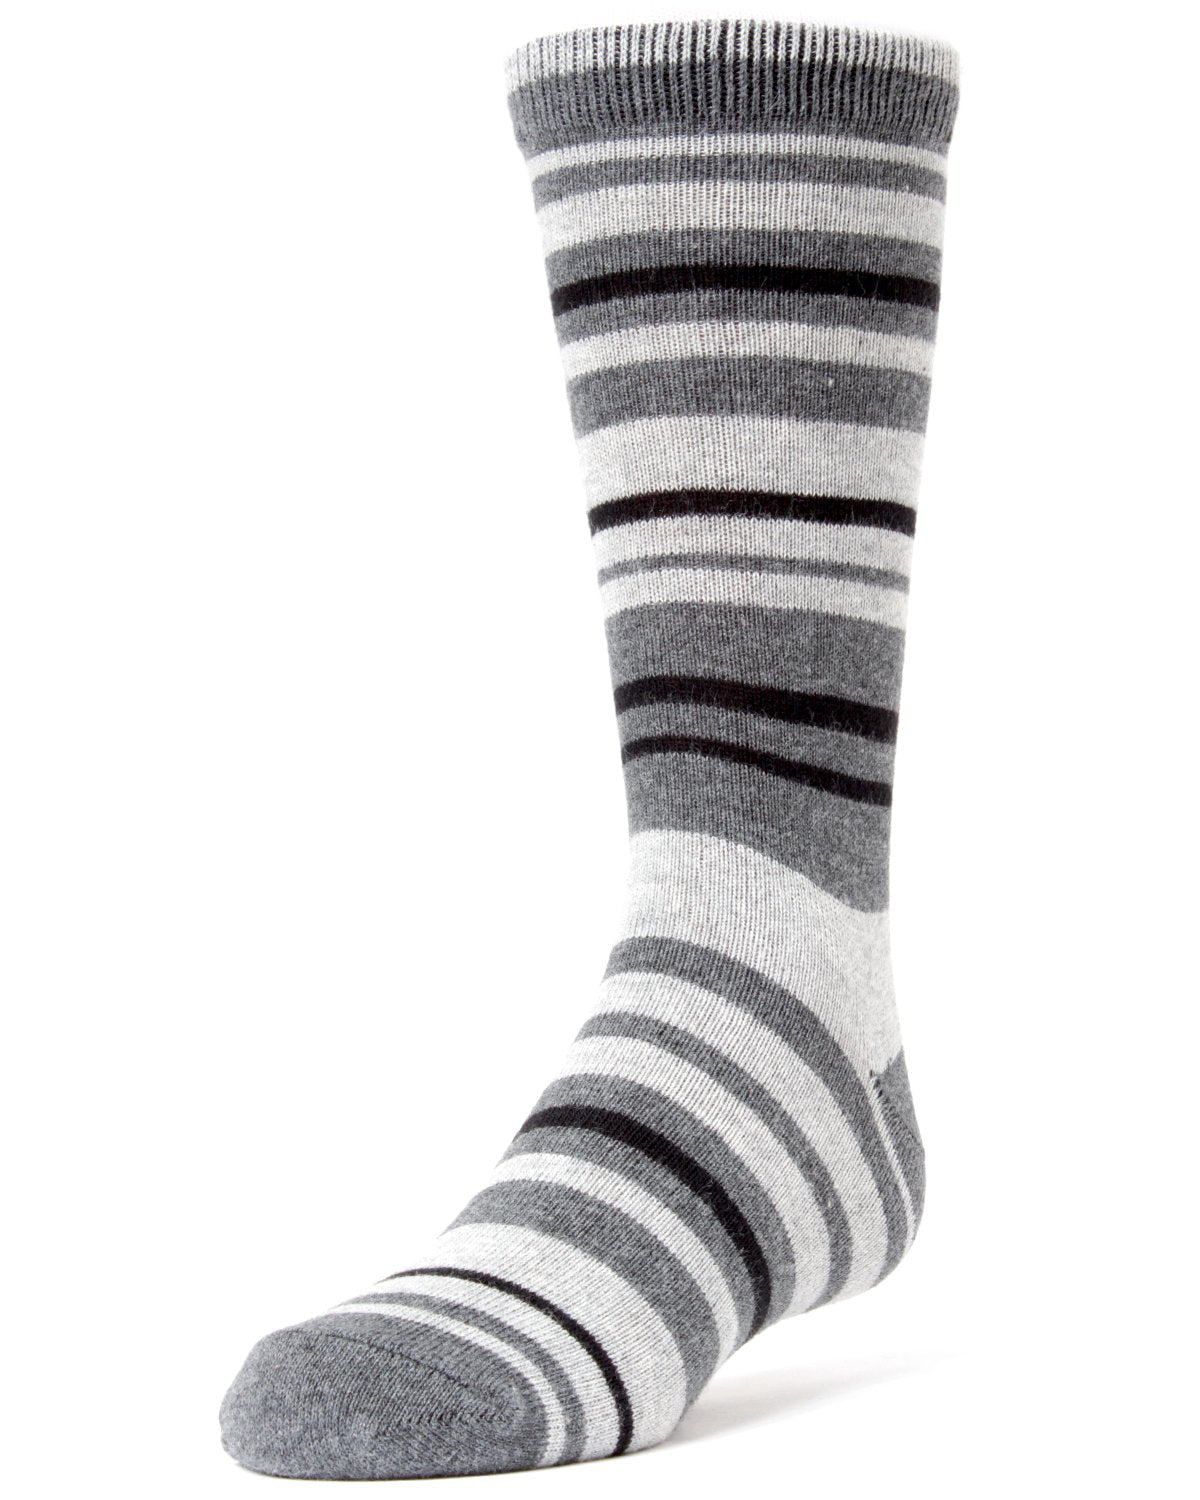 MeMoi Rings and Rungs Cotton Blend Striped Socks - Boys - Male - image 3 of 4